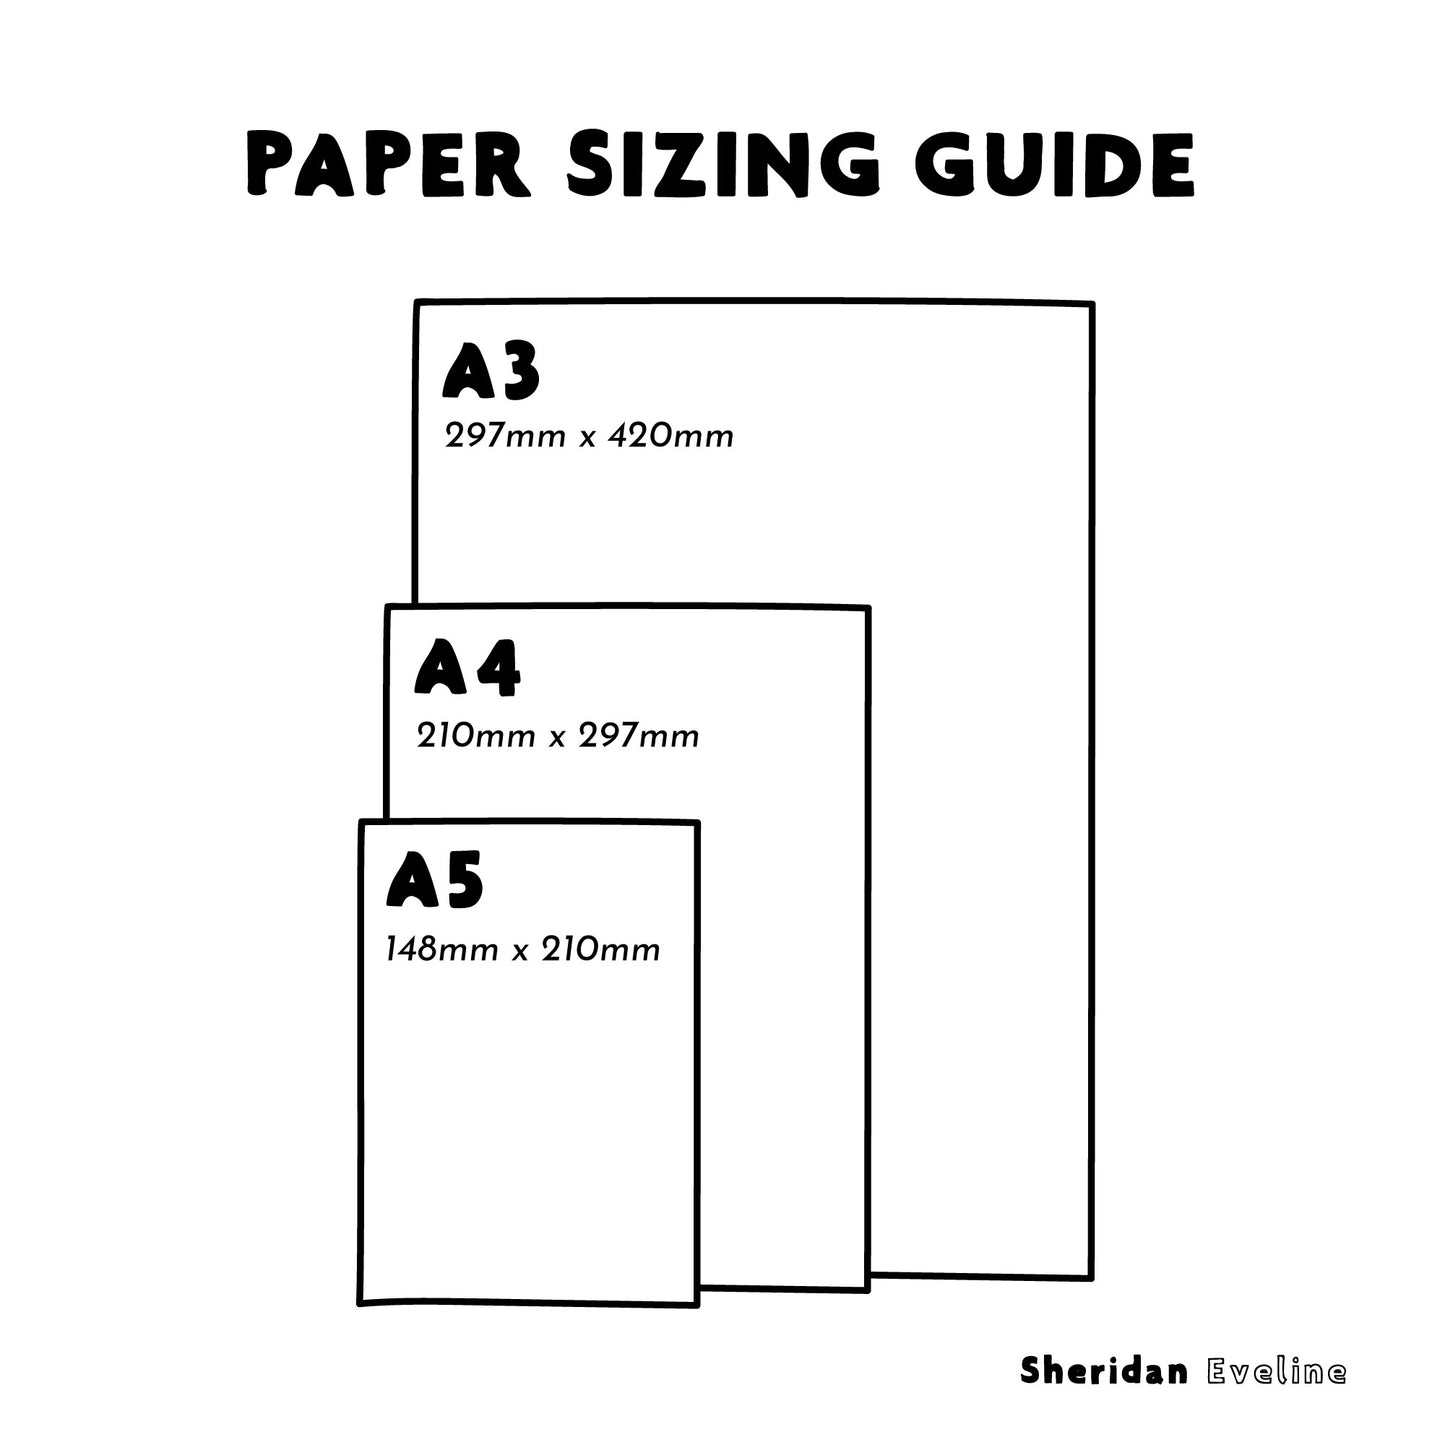 Sheridan Eveline - Paper Sizing Guide - A5, A4 & A3